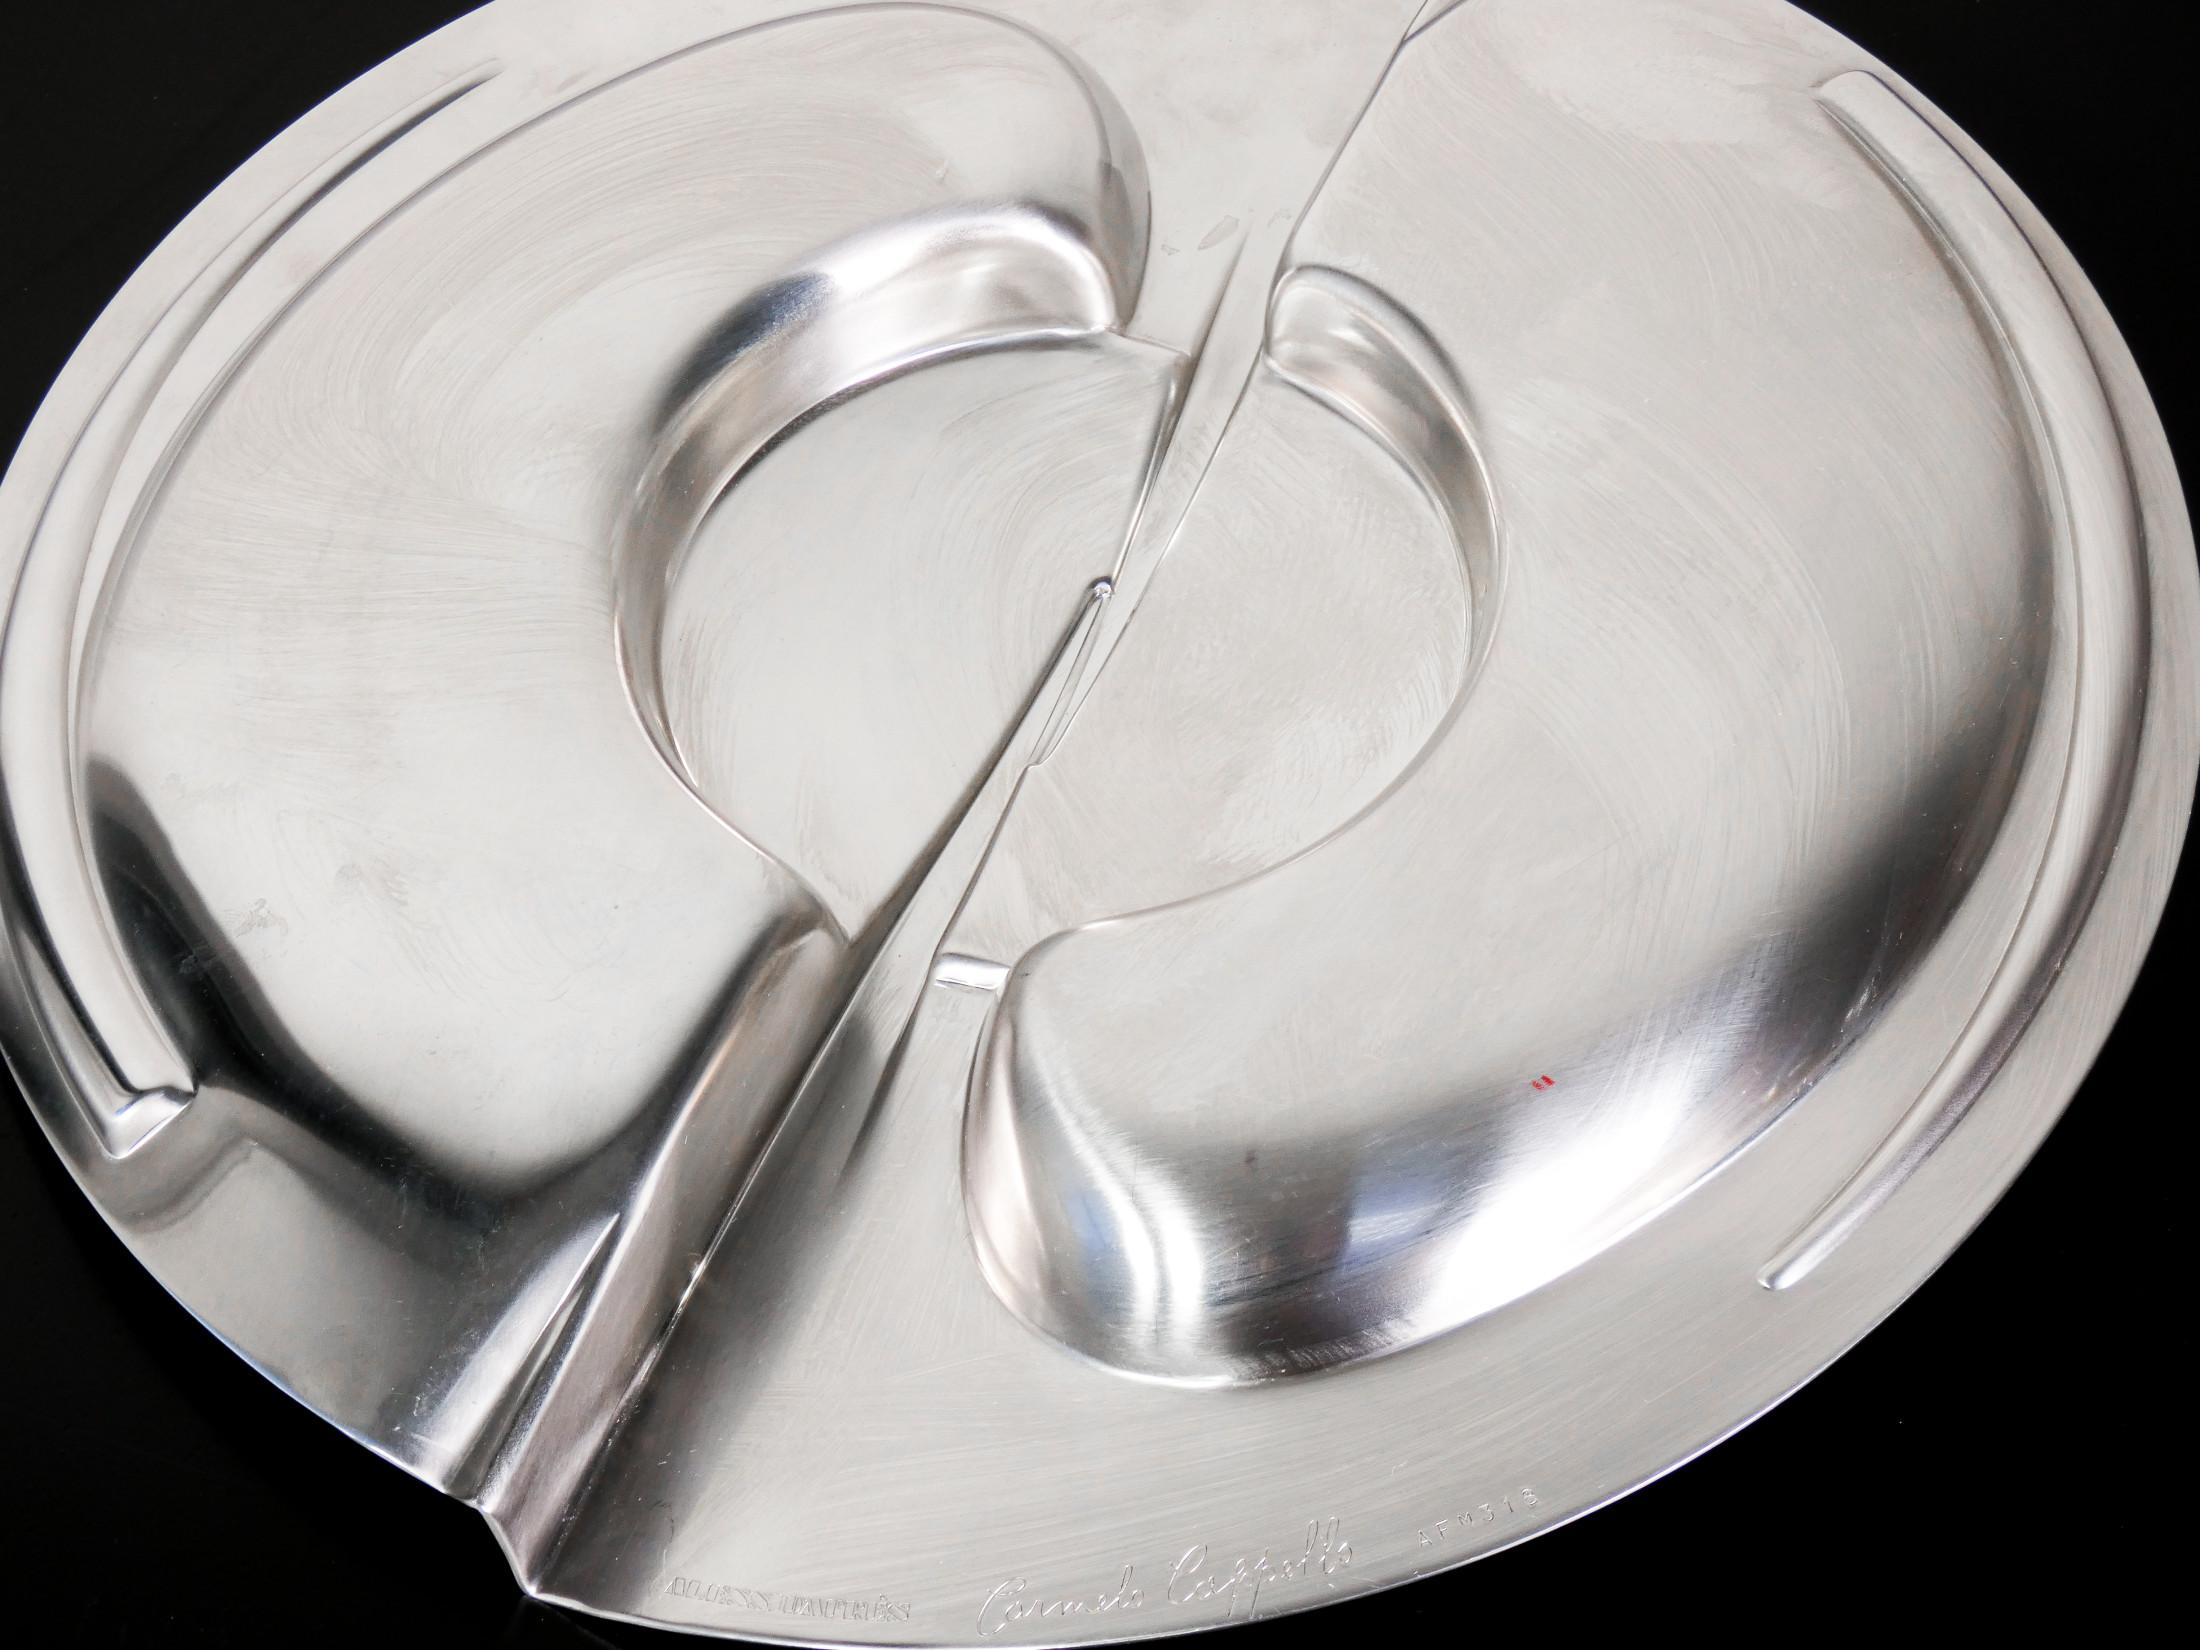 Steel Sculpture by C. Cappello for Alessi D'apres, 